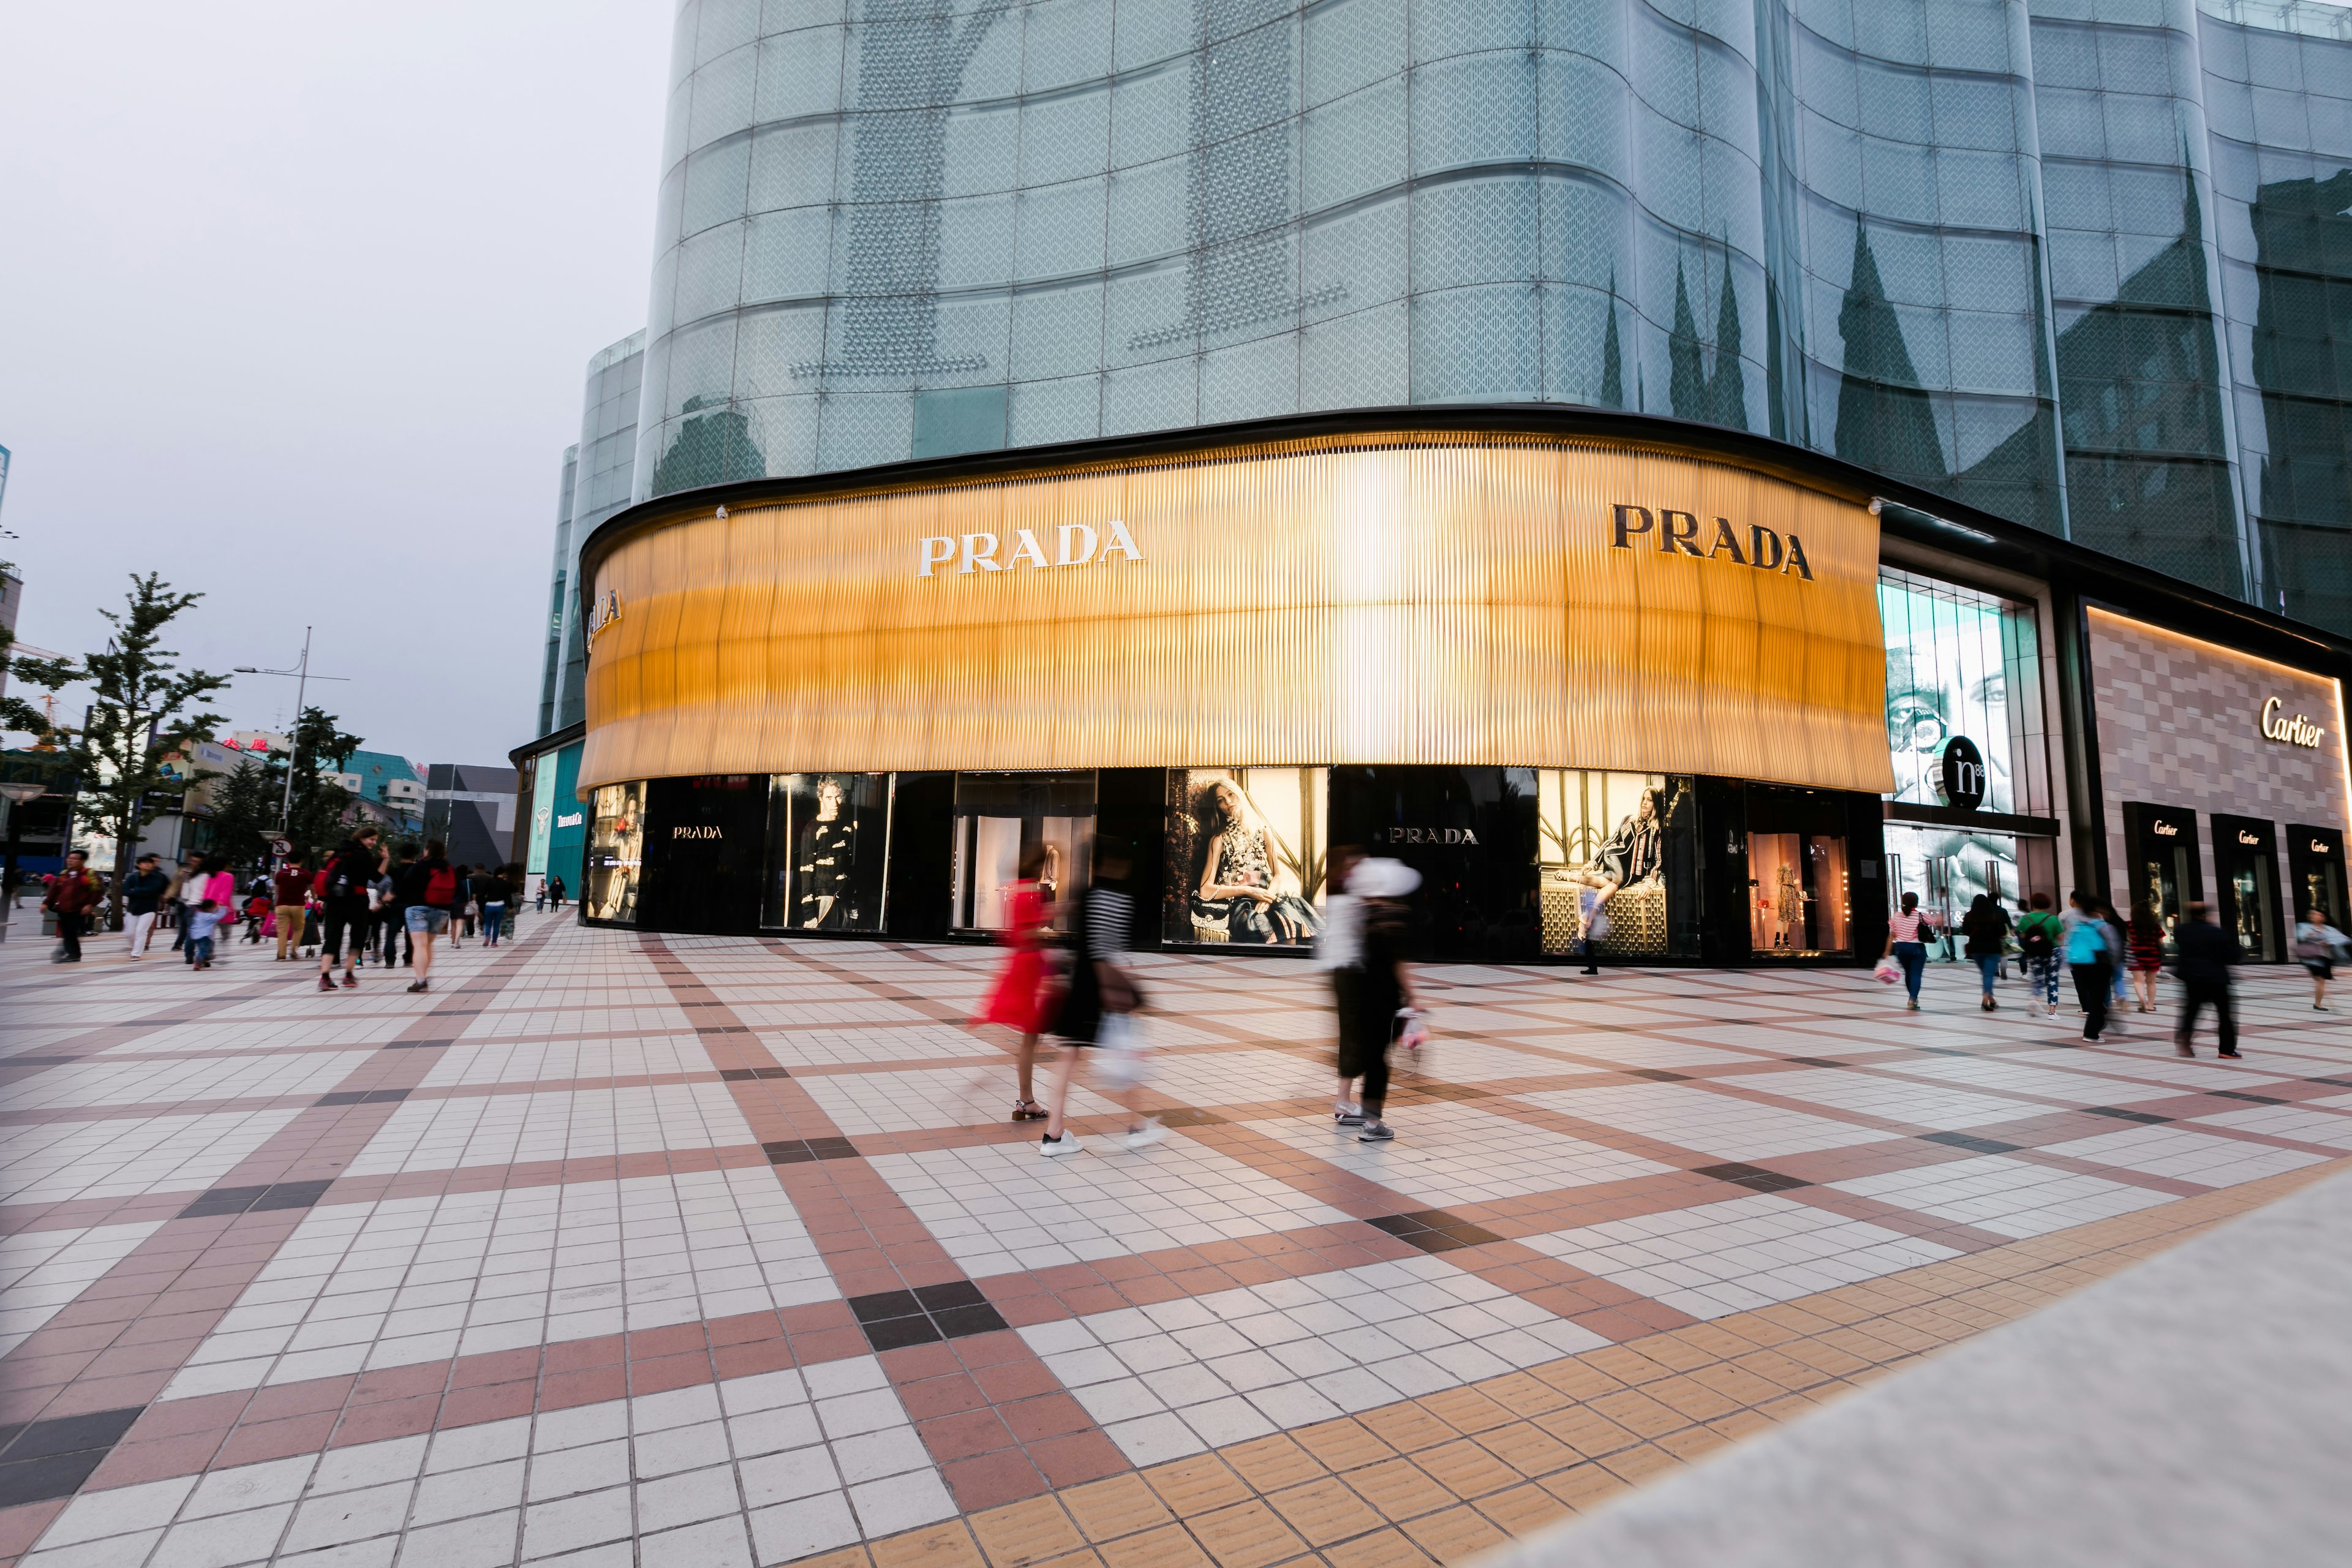 Prada is listed as the number two luxury brand China's millionaires aspire to buy in the next year, according to a recent report by Agility Research and Strategy. (Shutterstock)